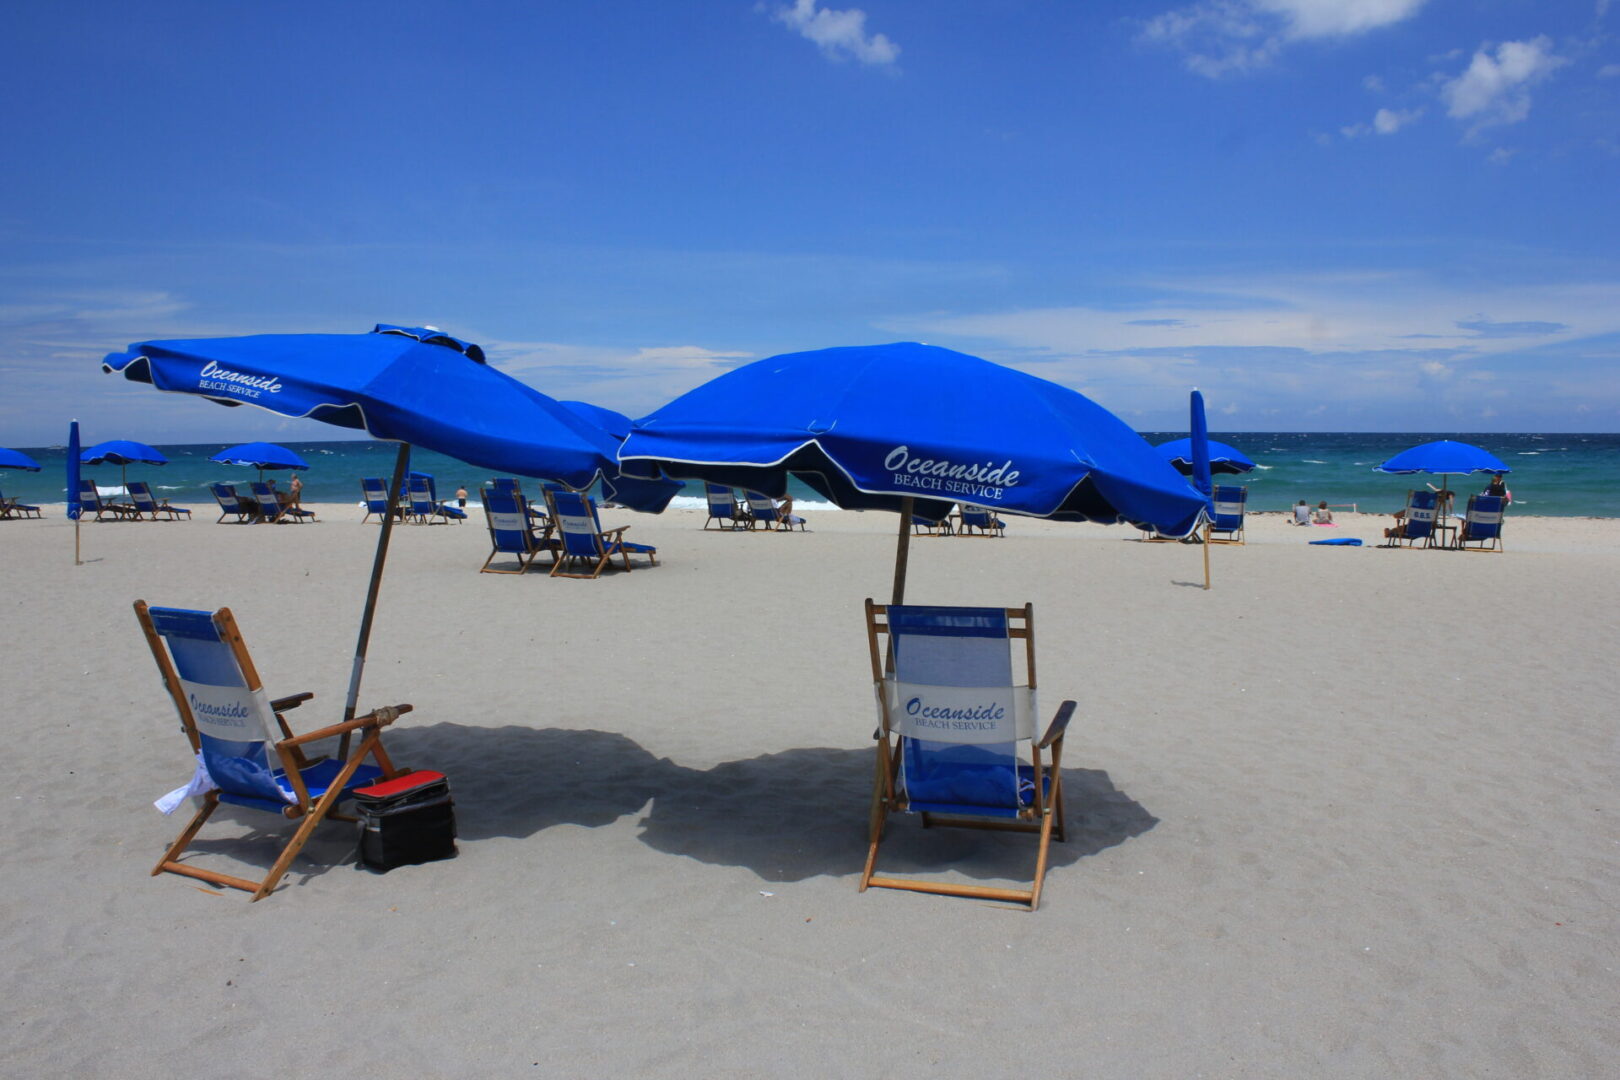 A beach with chairs and umbrellas on it